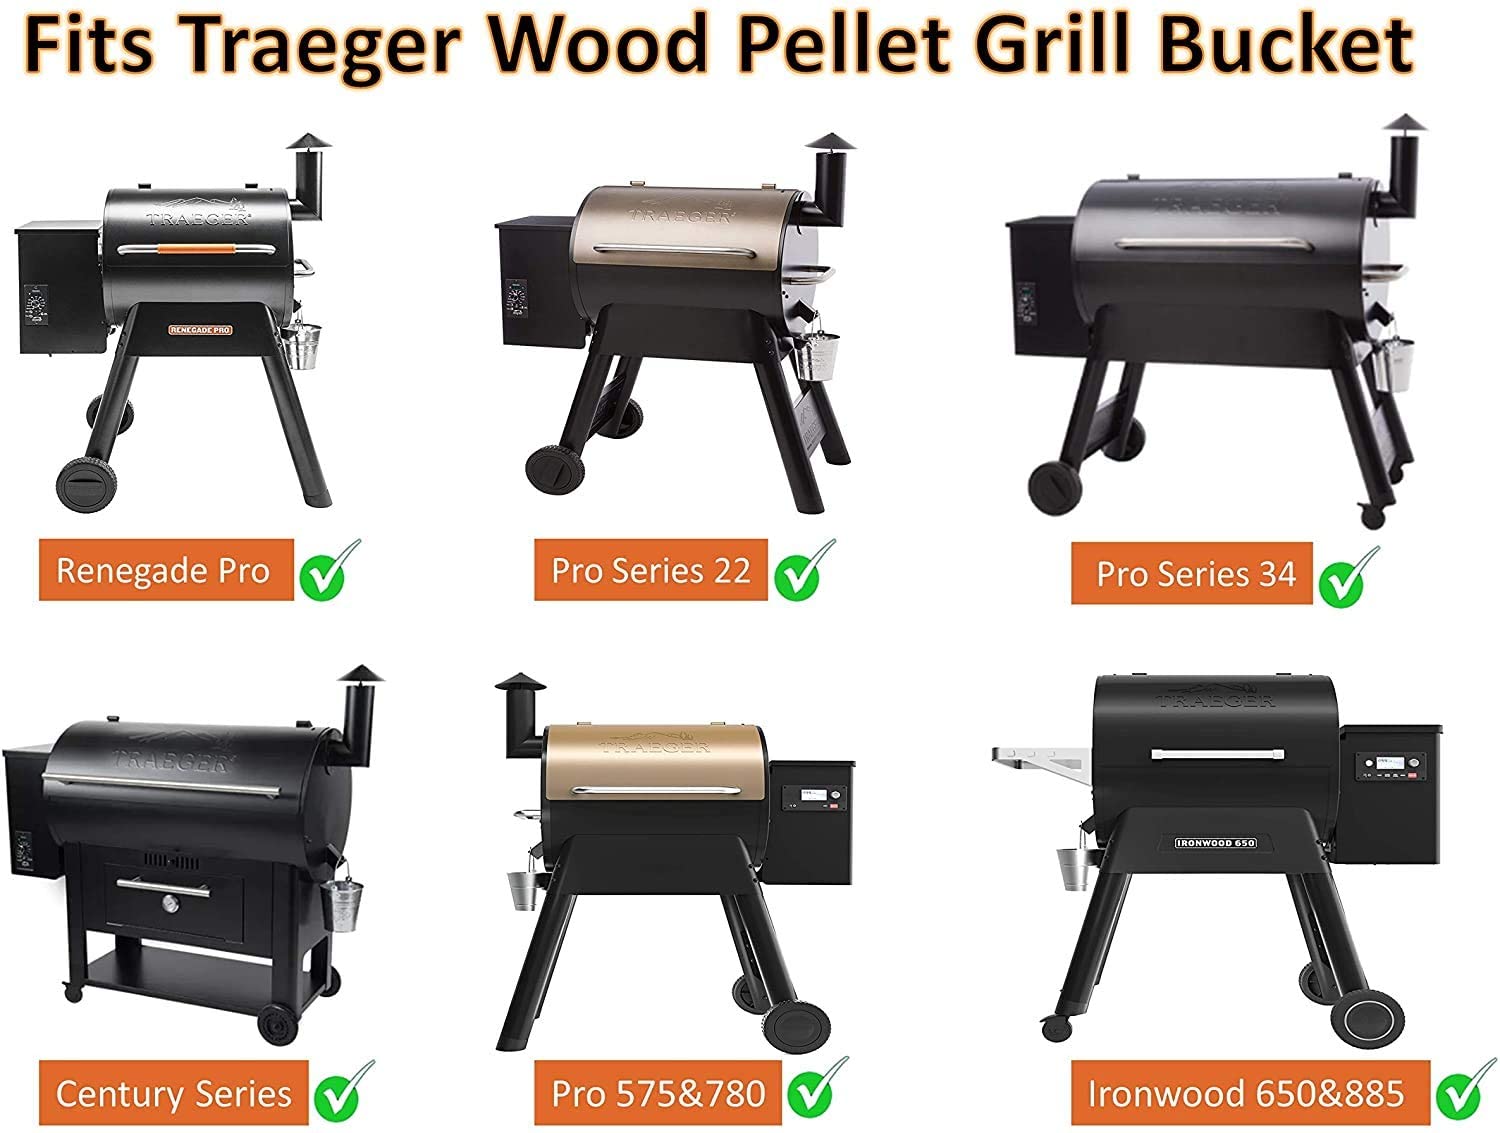 Grill Grease Bucket Liners Replacement Parts for Traeger Wood Pellet Grill & Smoker (32liners)